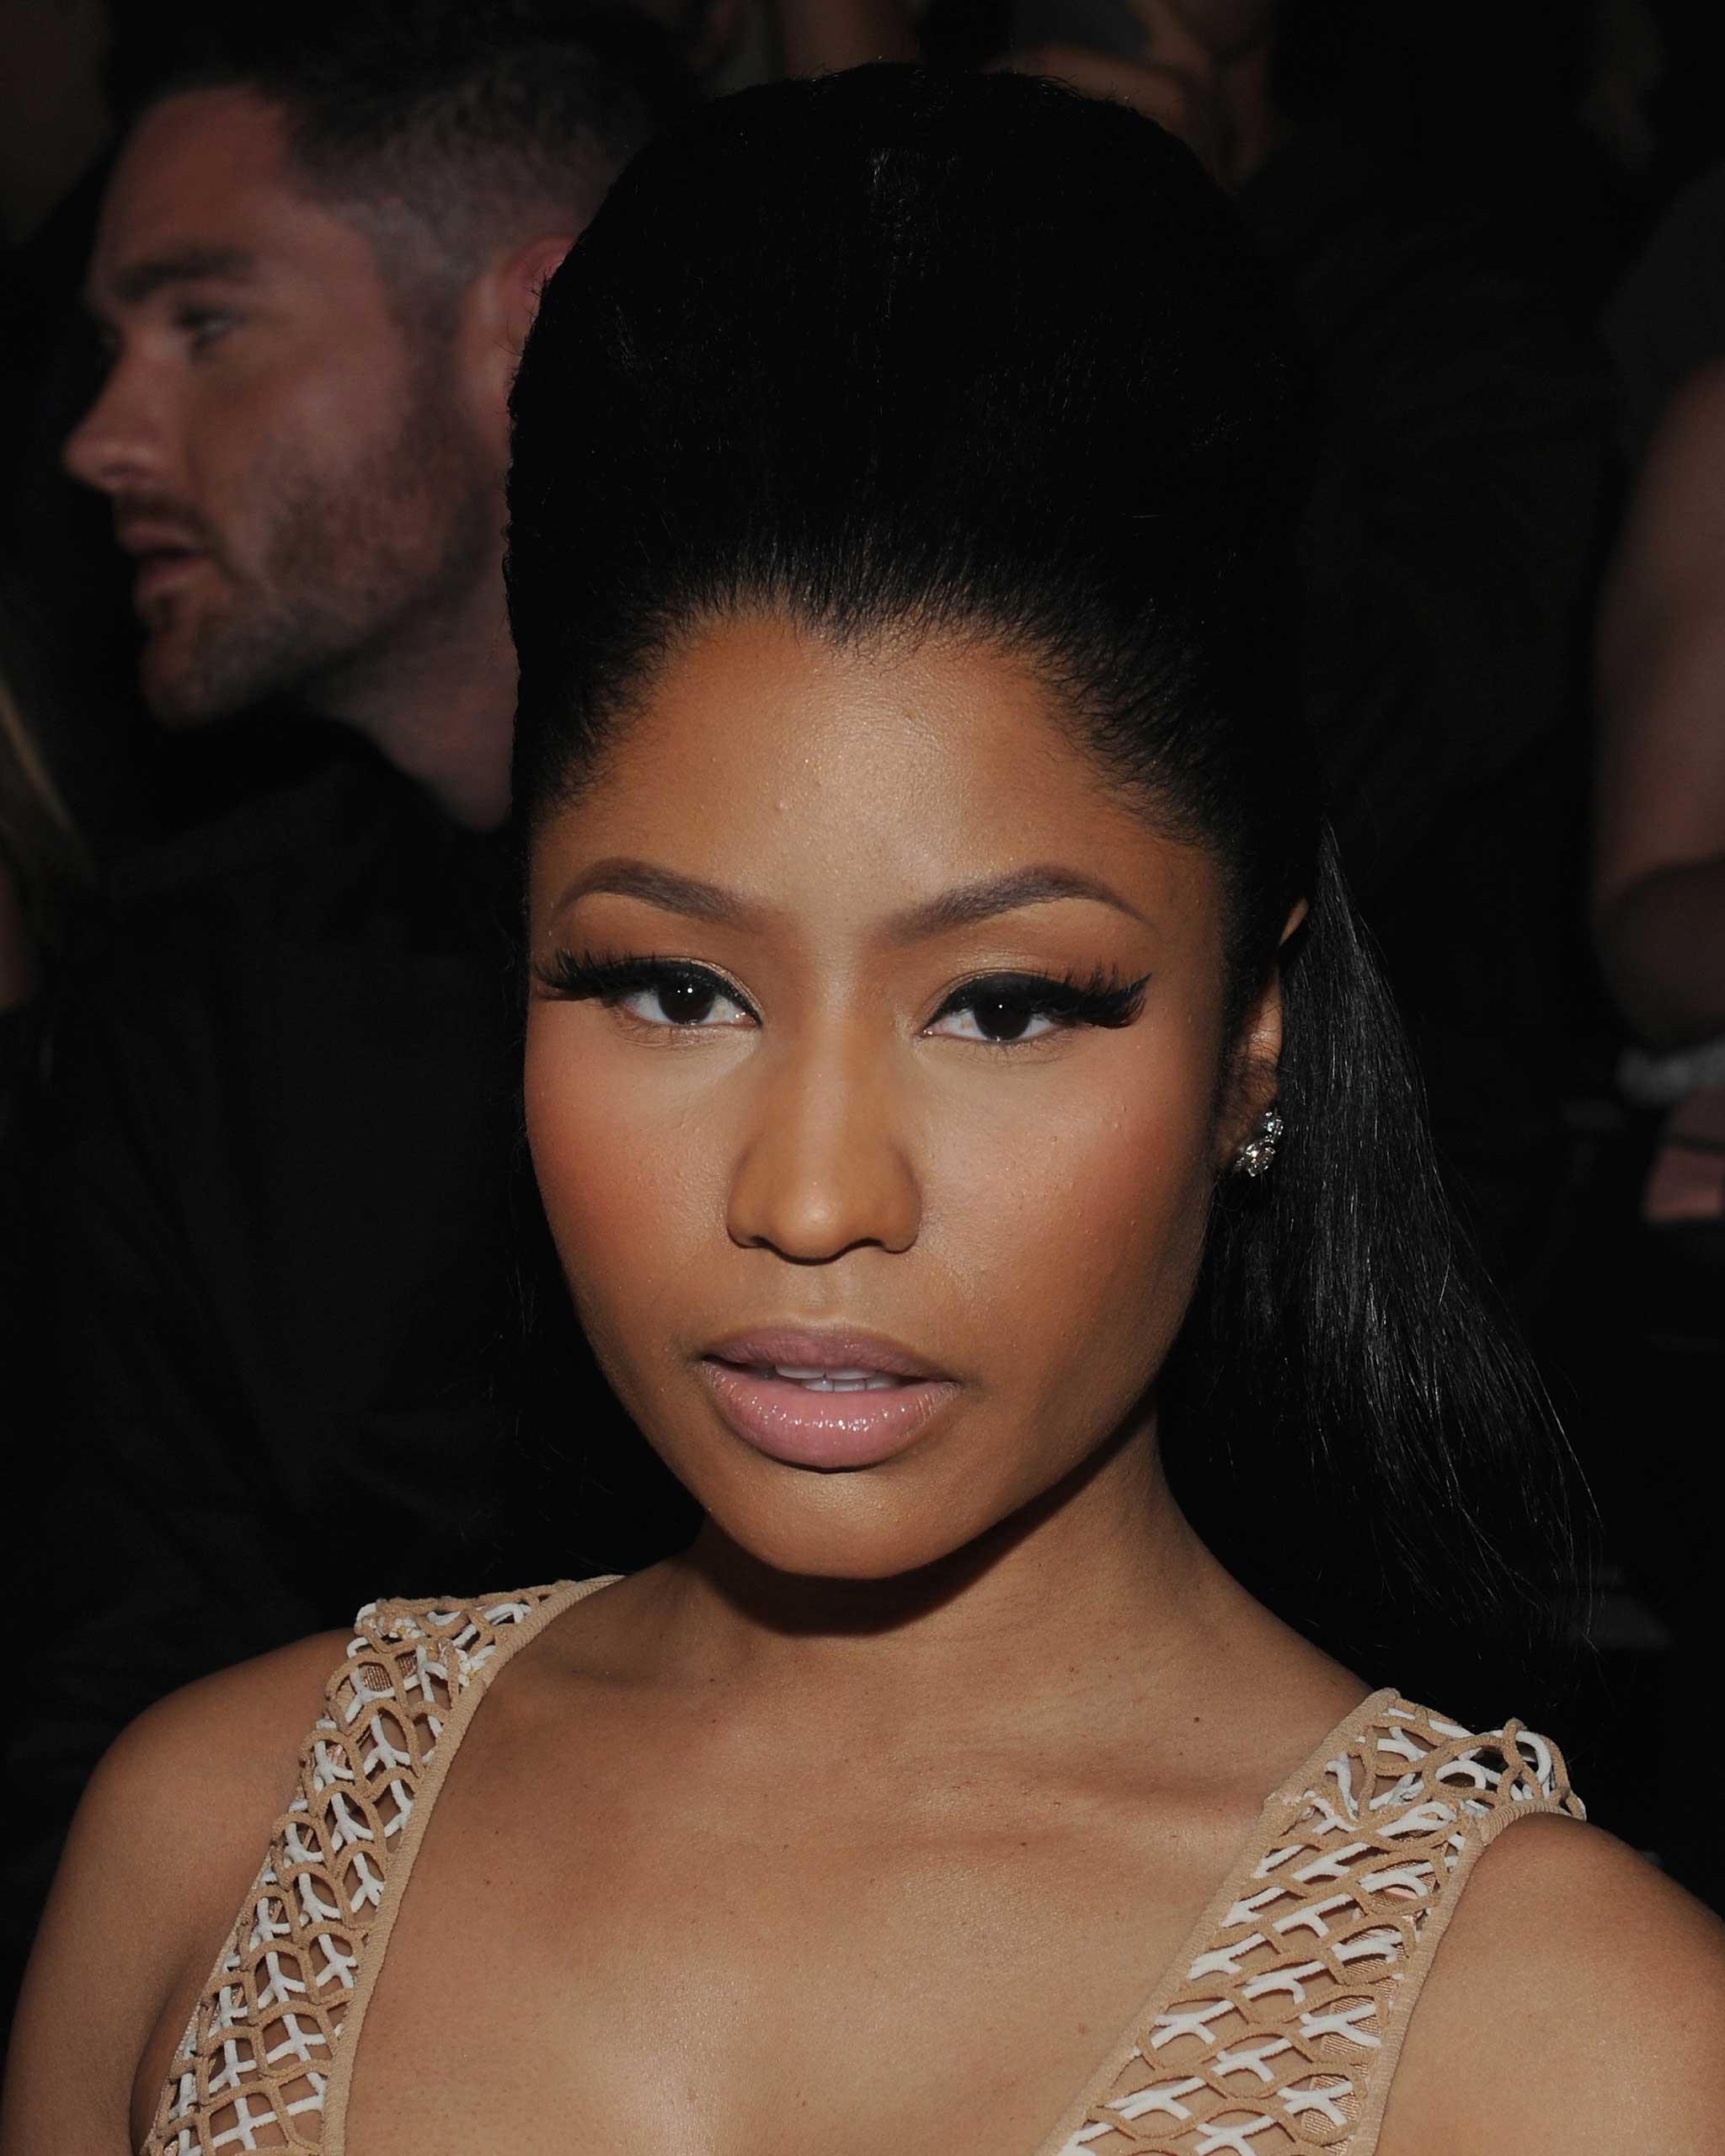 Nicki Minaj attends the Alexander Wang Spring 2016 fashion show during New York Fashion Week at Pier 94 in New York City,  on Sept. 12, 2015. (Craig Barritt—Getty Images)